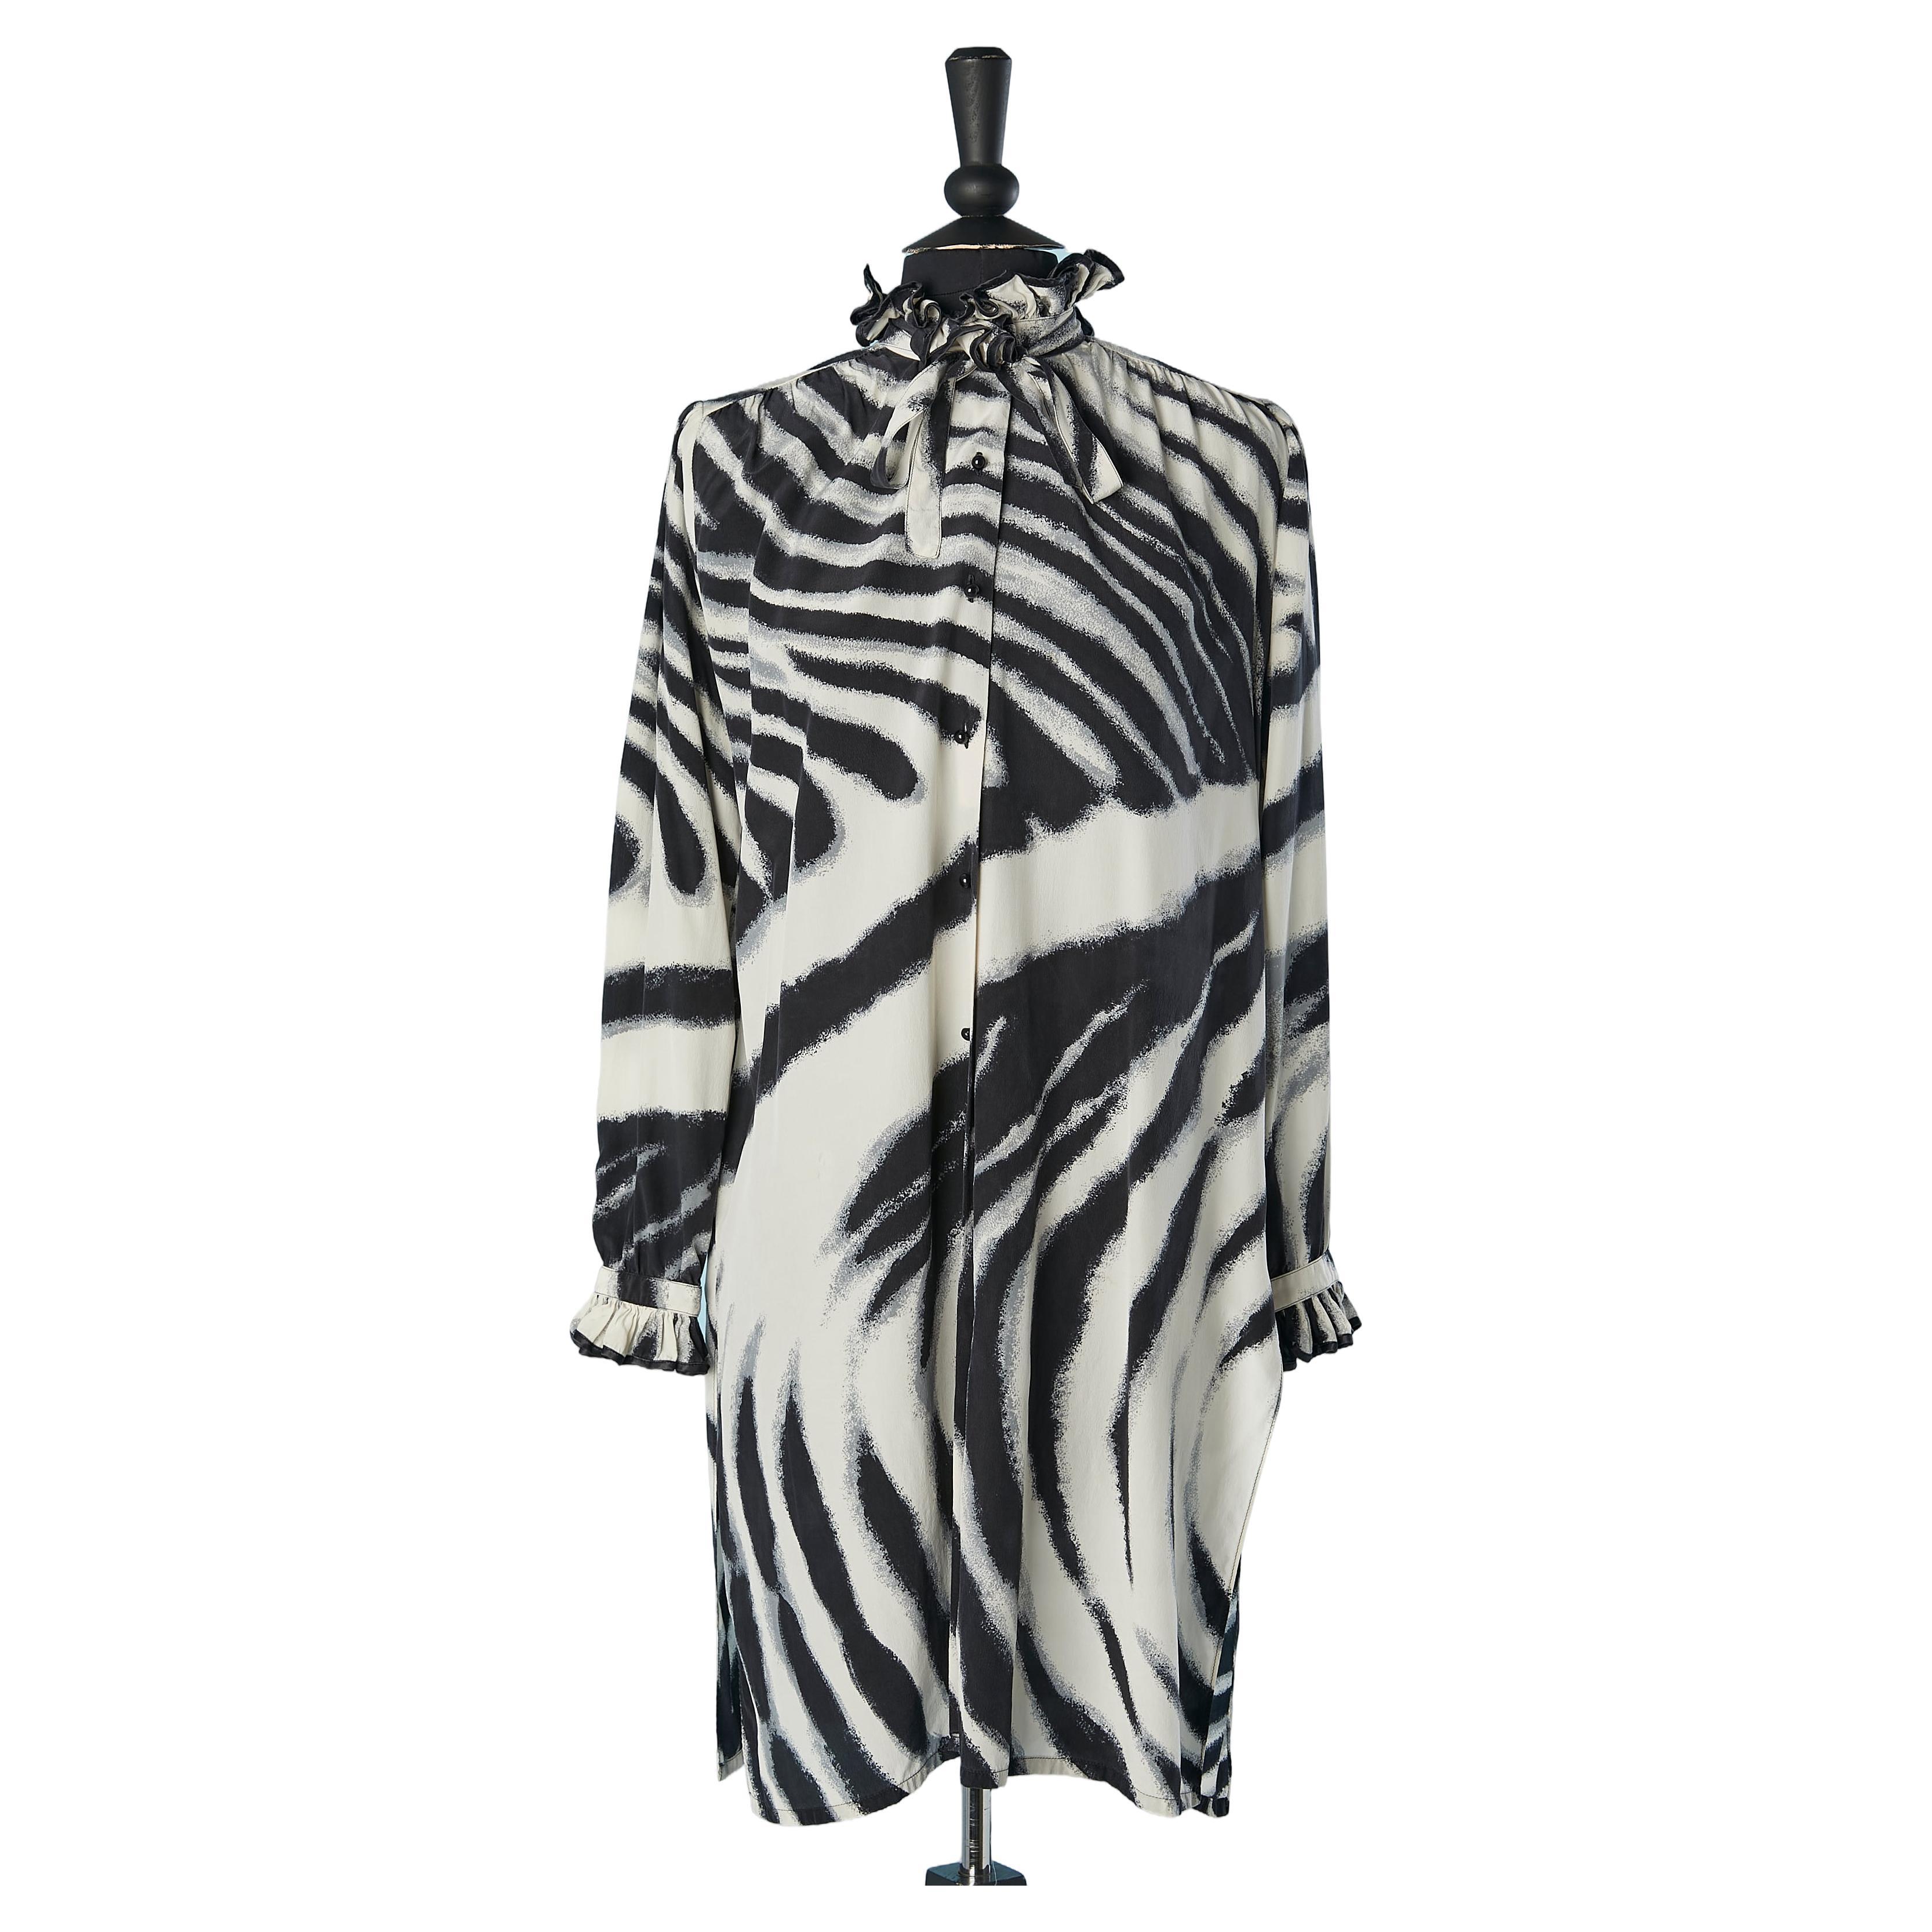 Silk zebra print cocktail dress with collar and cuffs ruffles Louis Féraud  For Sale